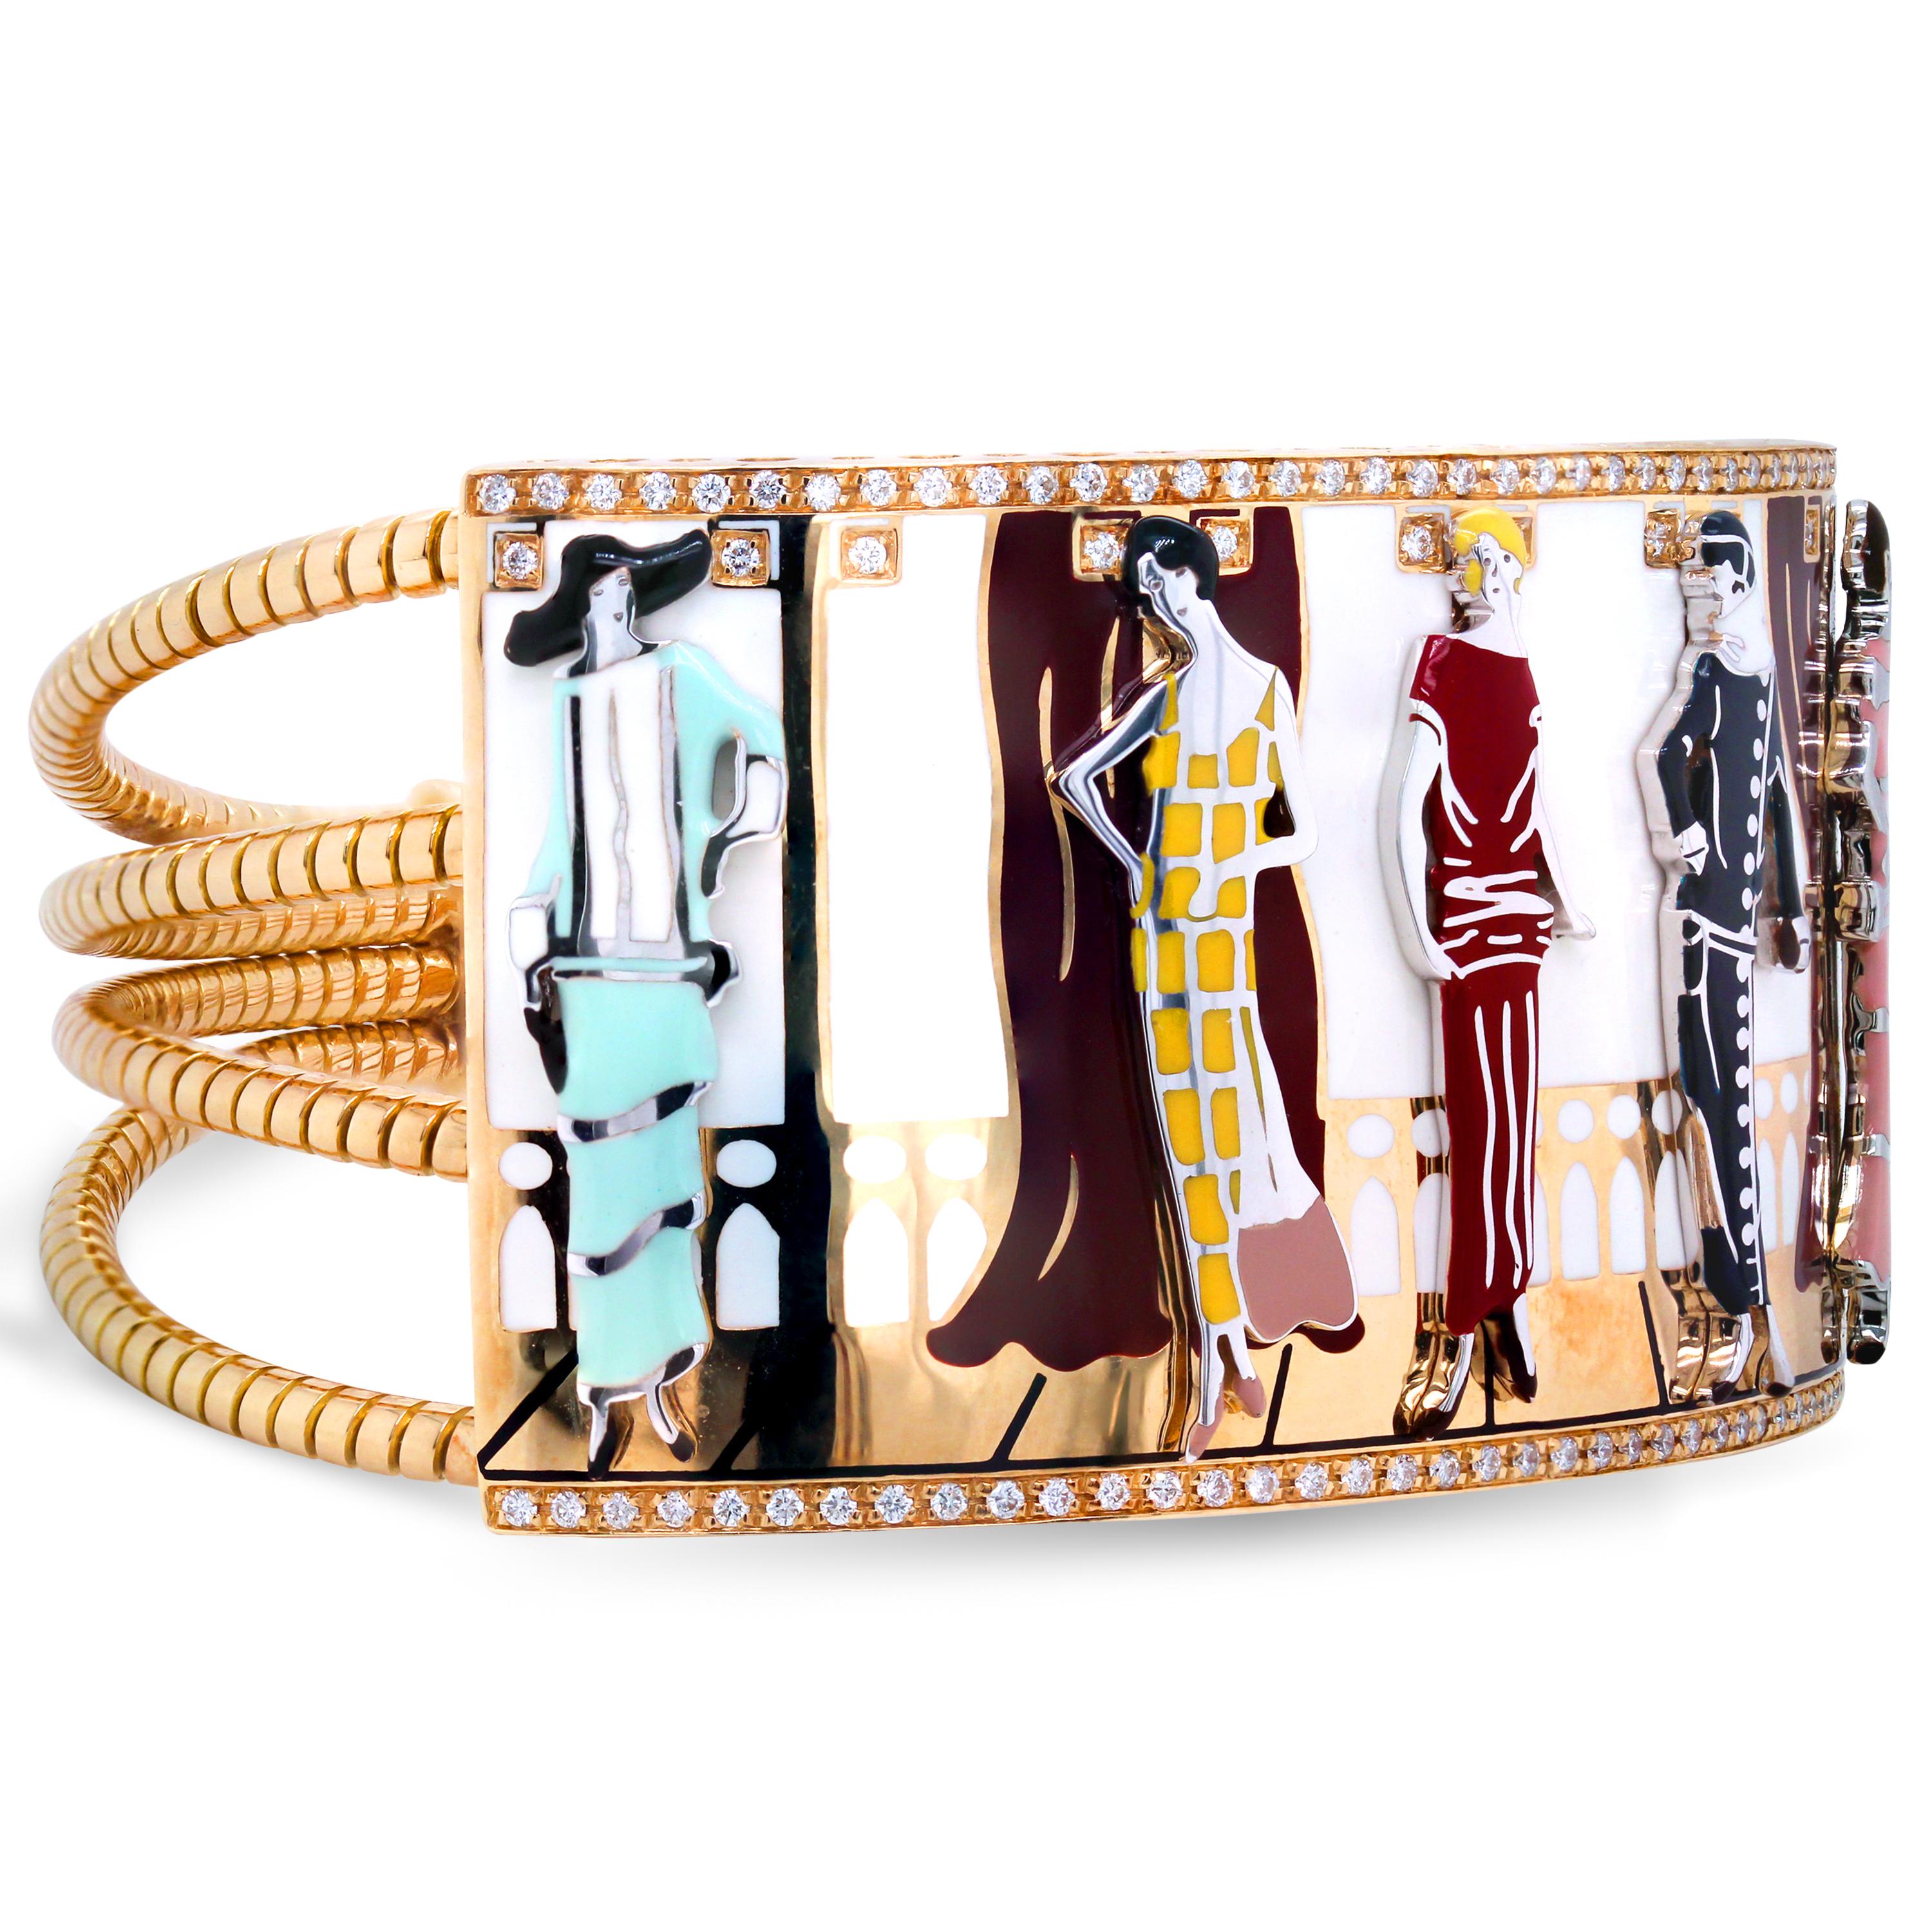 Roberto Coin 18K Yellow Gold Diamond Enamel Ladies Models Wide Cuff Bracelet

This rare, multi-color enamel cuff by Roberto Coin showcases extraordinary detail. The wide cuff is crafted in 18 karat yellow gold. 

0.90 carat G color, VS clarity